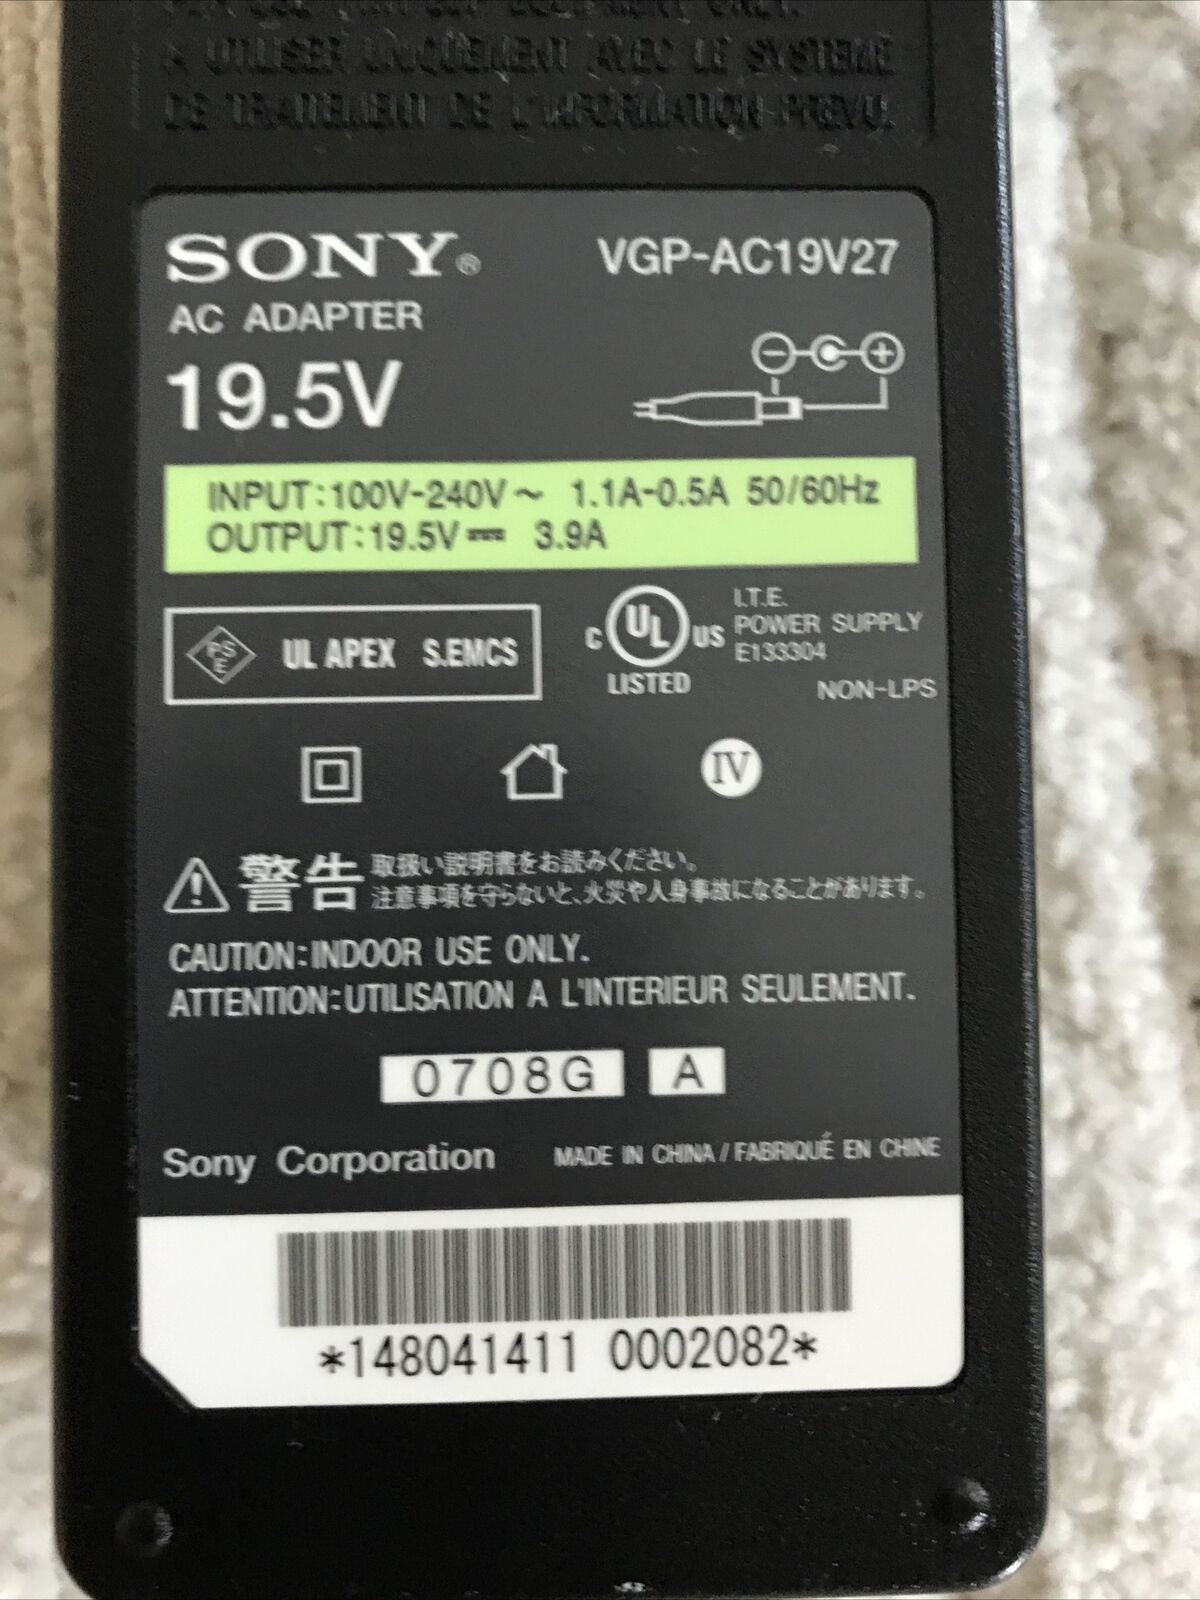 Sony Genuine Laptop Charger AC Adapter Power Supply VGP-AC19V27 19.5V 3.9A 76W Brand: Sony Color: Black Ty